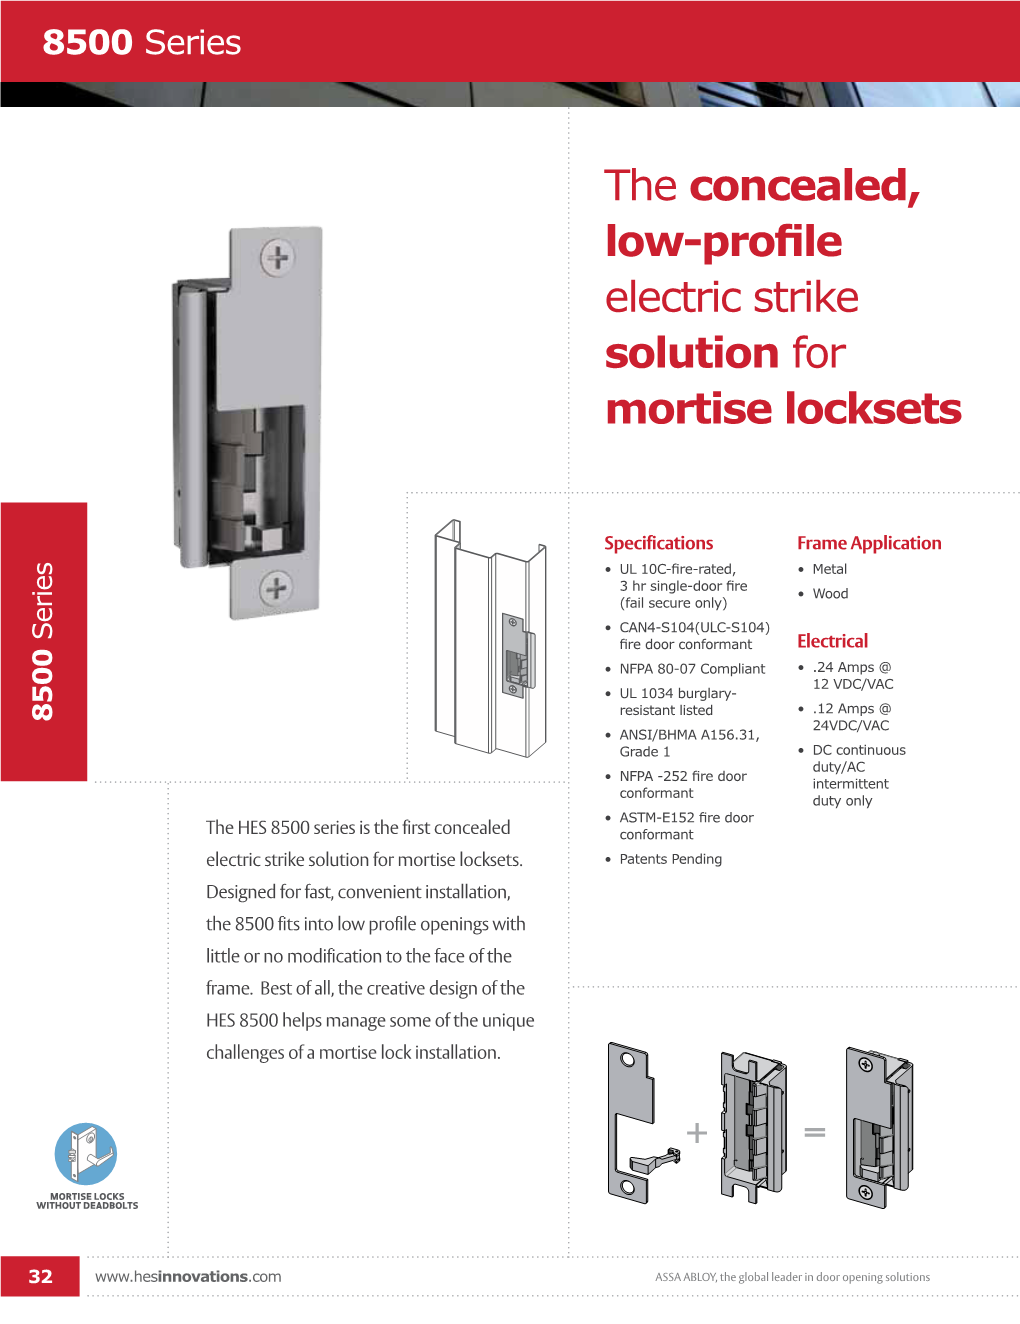 The Concealed, Low-Profile Electric Strike Solution for Mortise Locksets